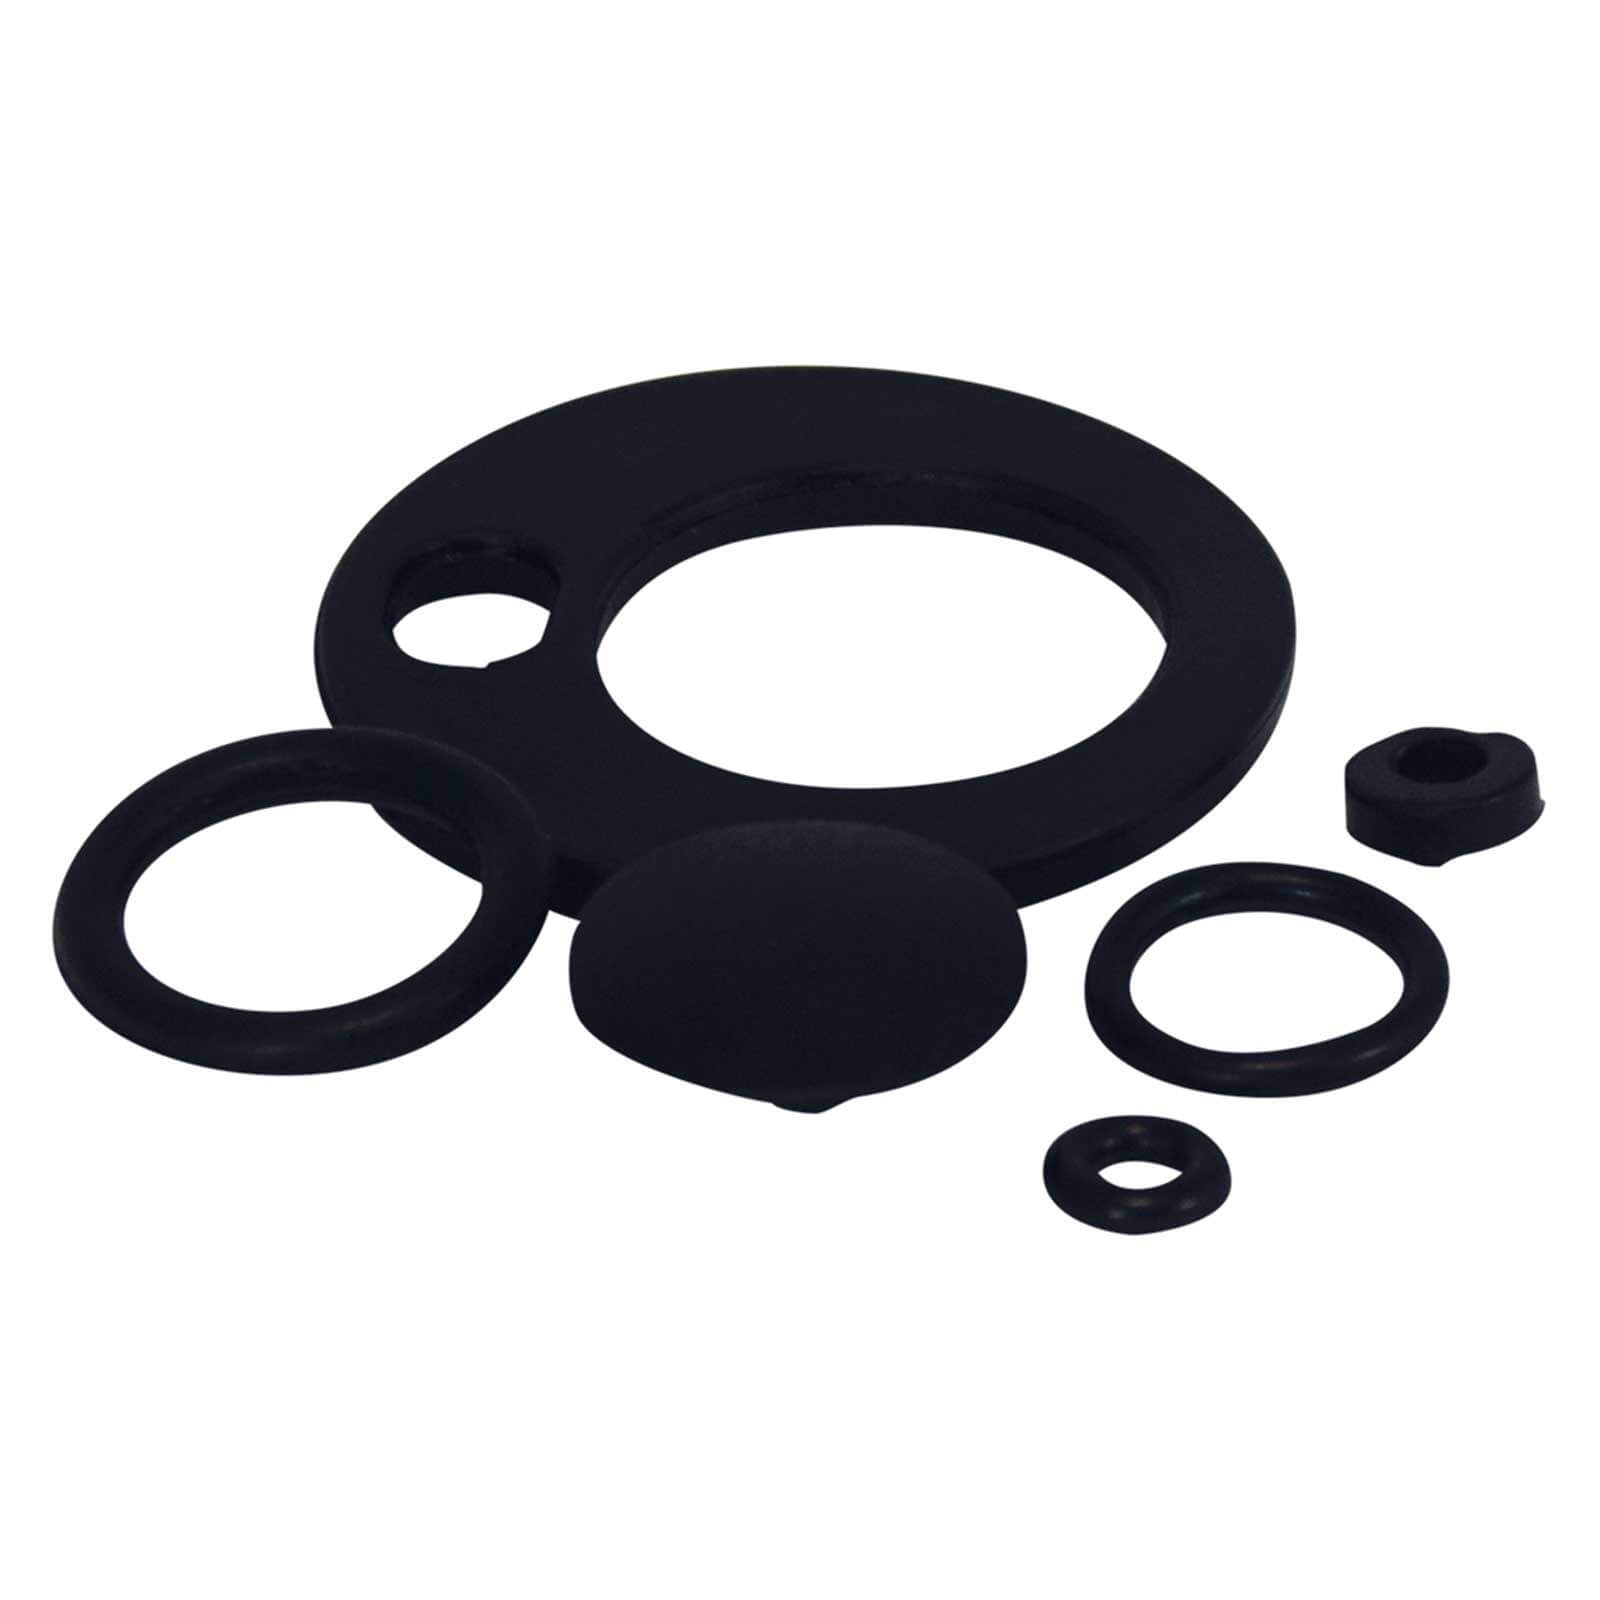 Photo of Spear And Jackson Replacement O Rings For 2l Pump Action Pressure Sprayers